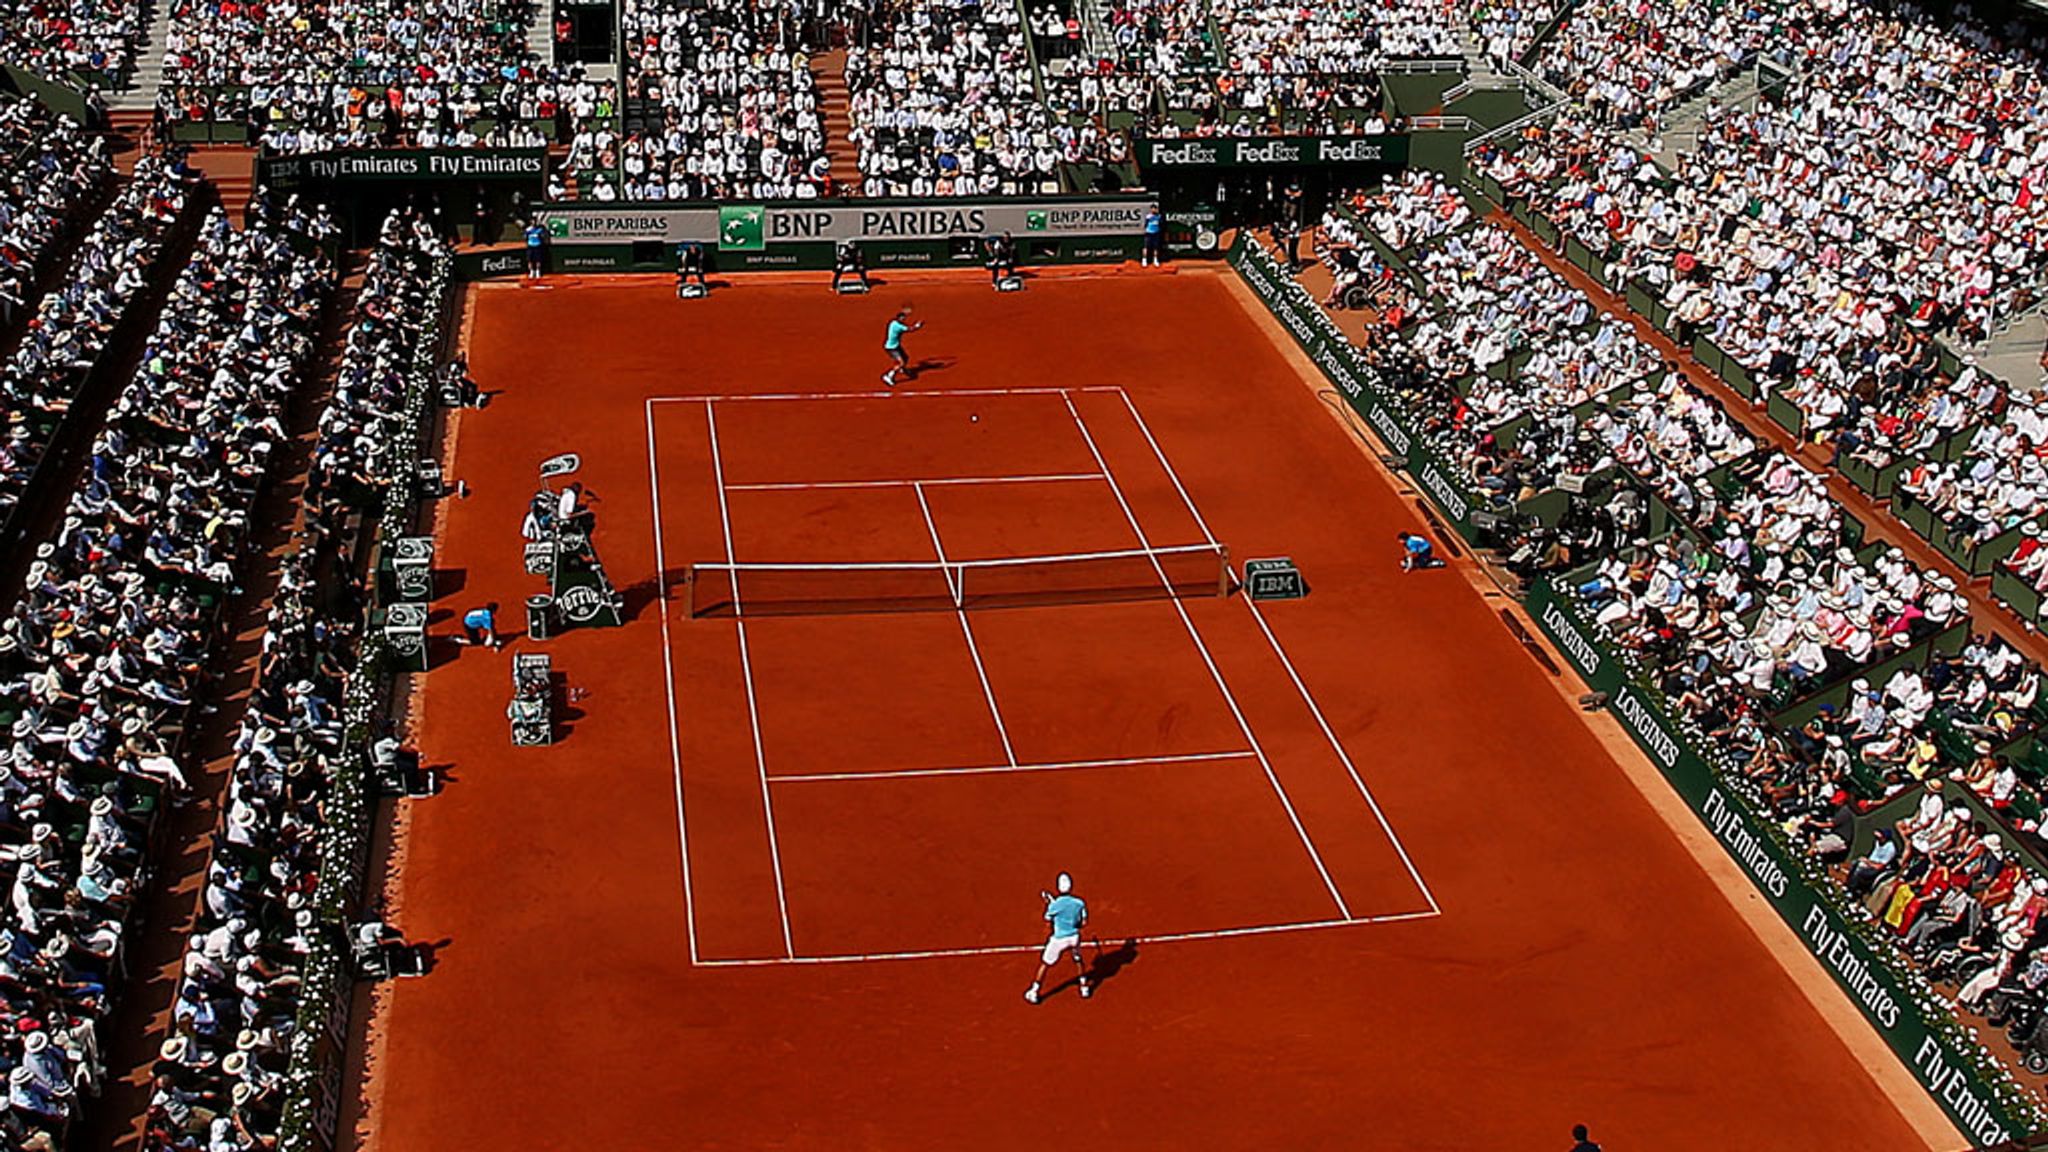 Retractable roof for Court Philippe Chatrier at Roland Garros, Tennis News